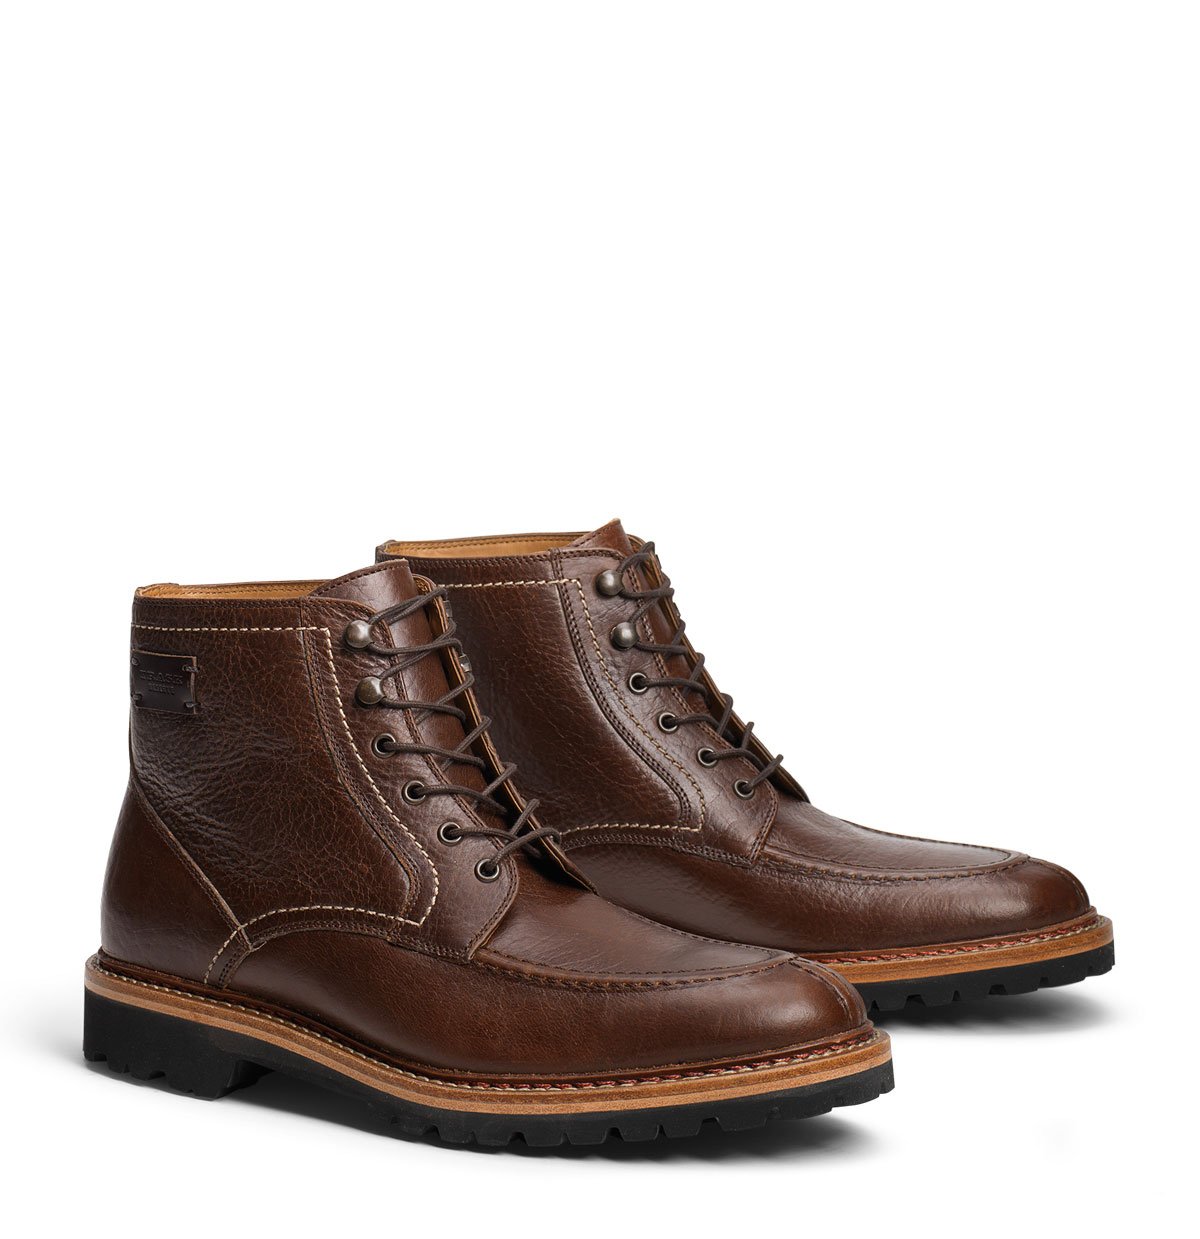 Reserve Collection Boots by Trask - Gessato